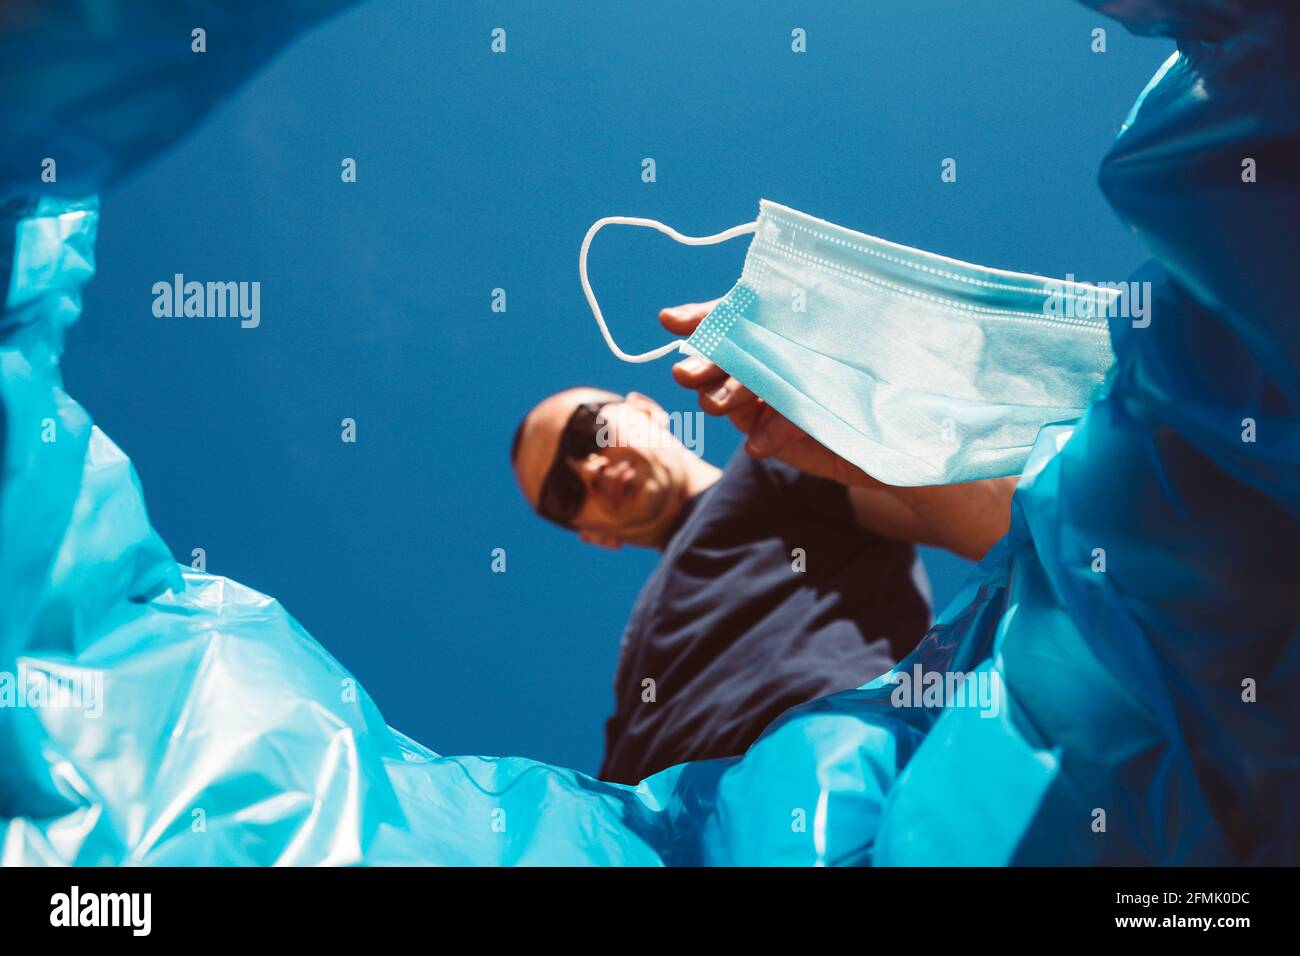 Man throwing a surgical mask in a garbage can. Concept for easing restrictions and ending the coronavirus pandemic. Stock Photo